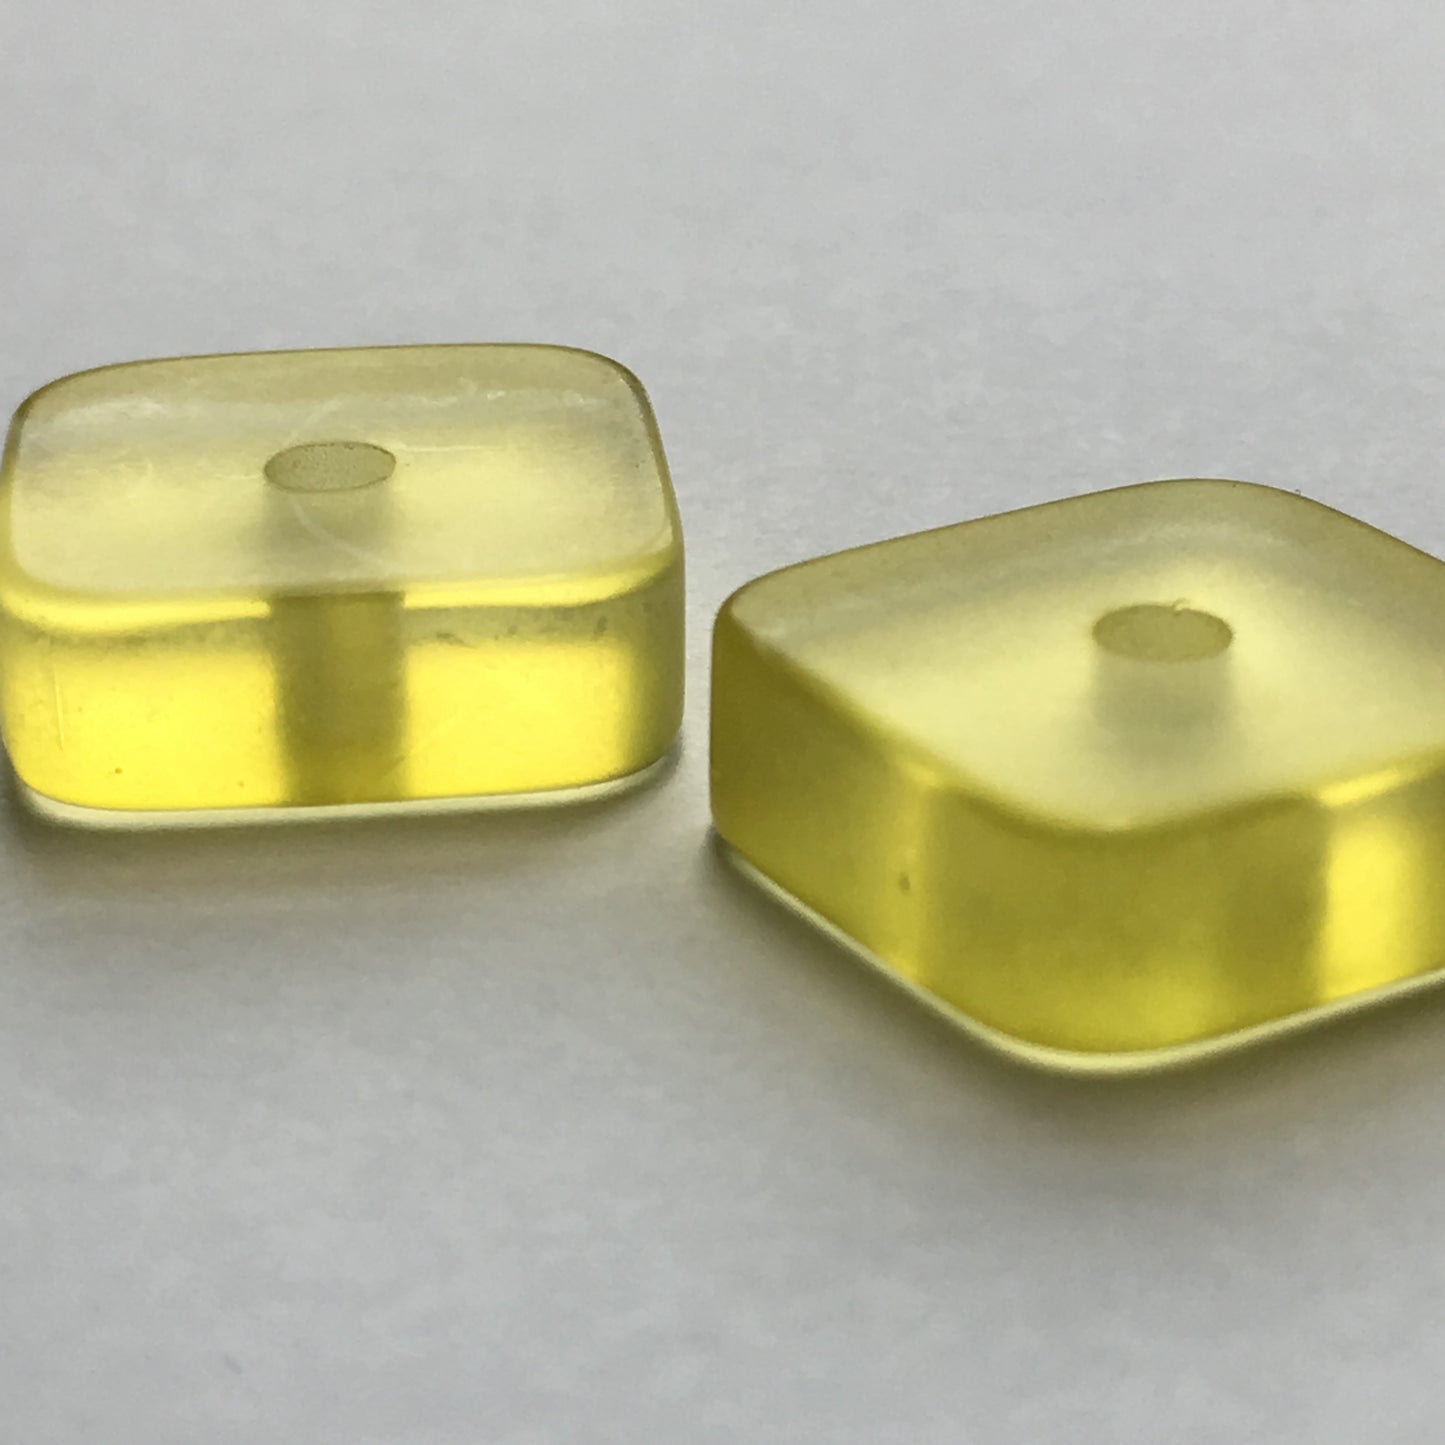 Translucent Yellow Acrylic Square Flat Center-Drilled Beads, 14 x 5 mm - 2 Beads